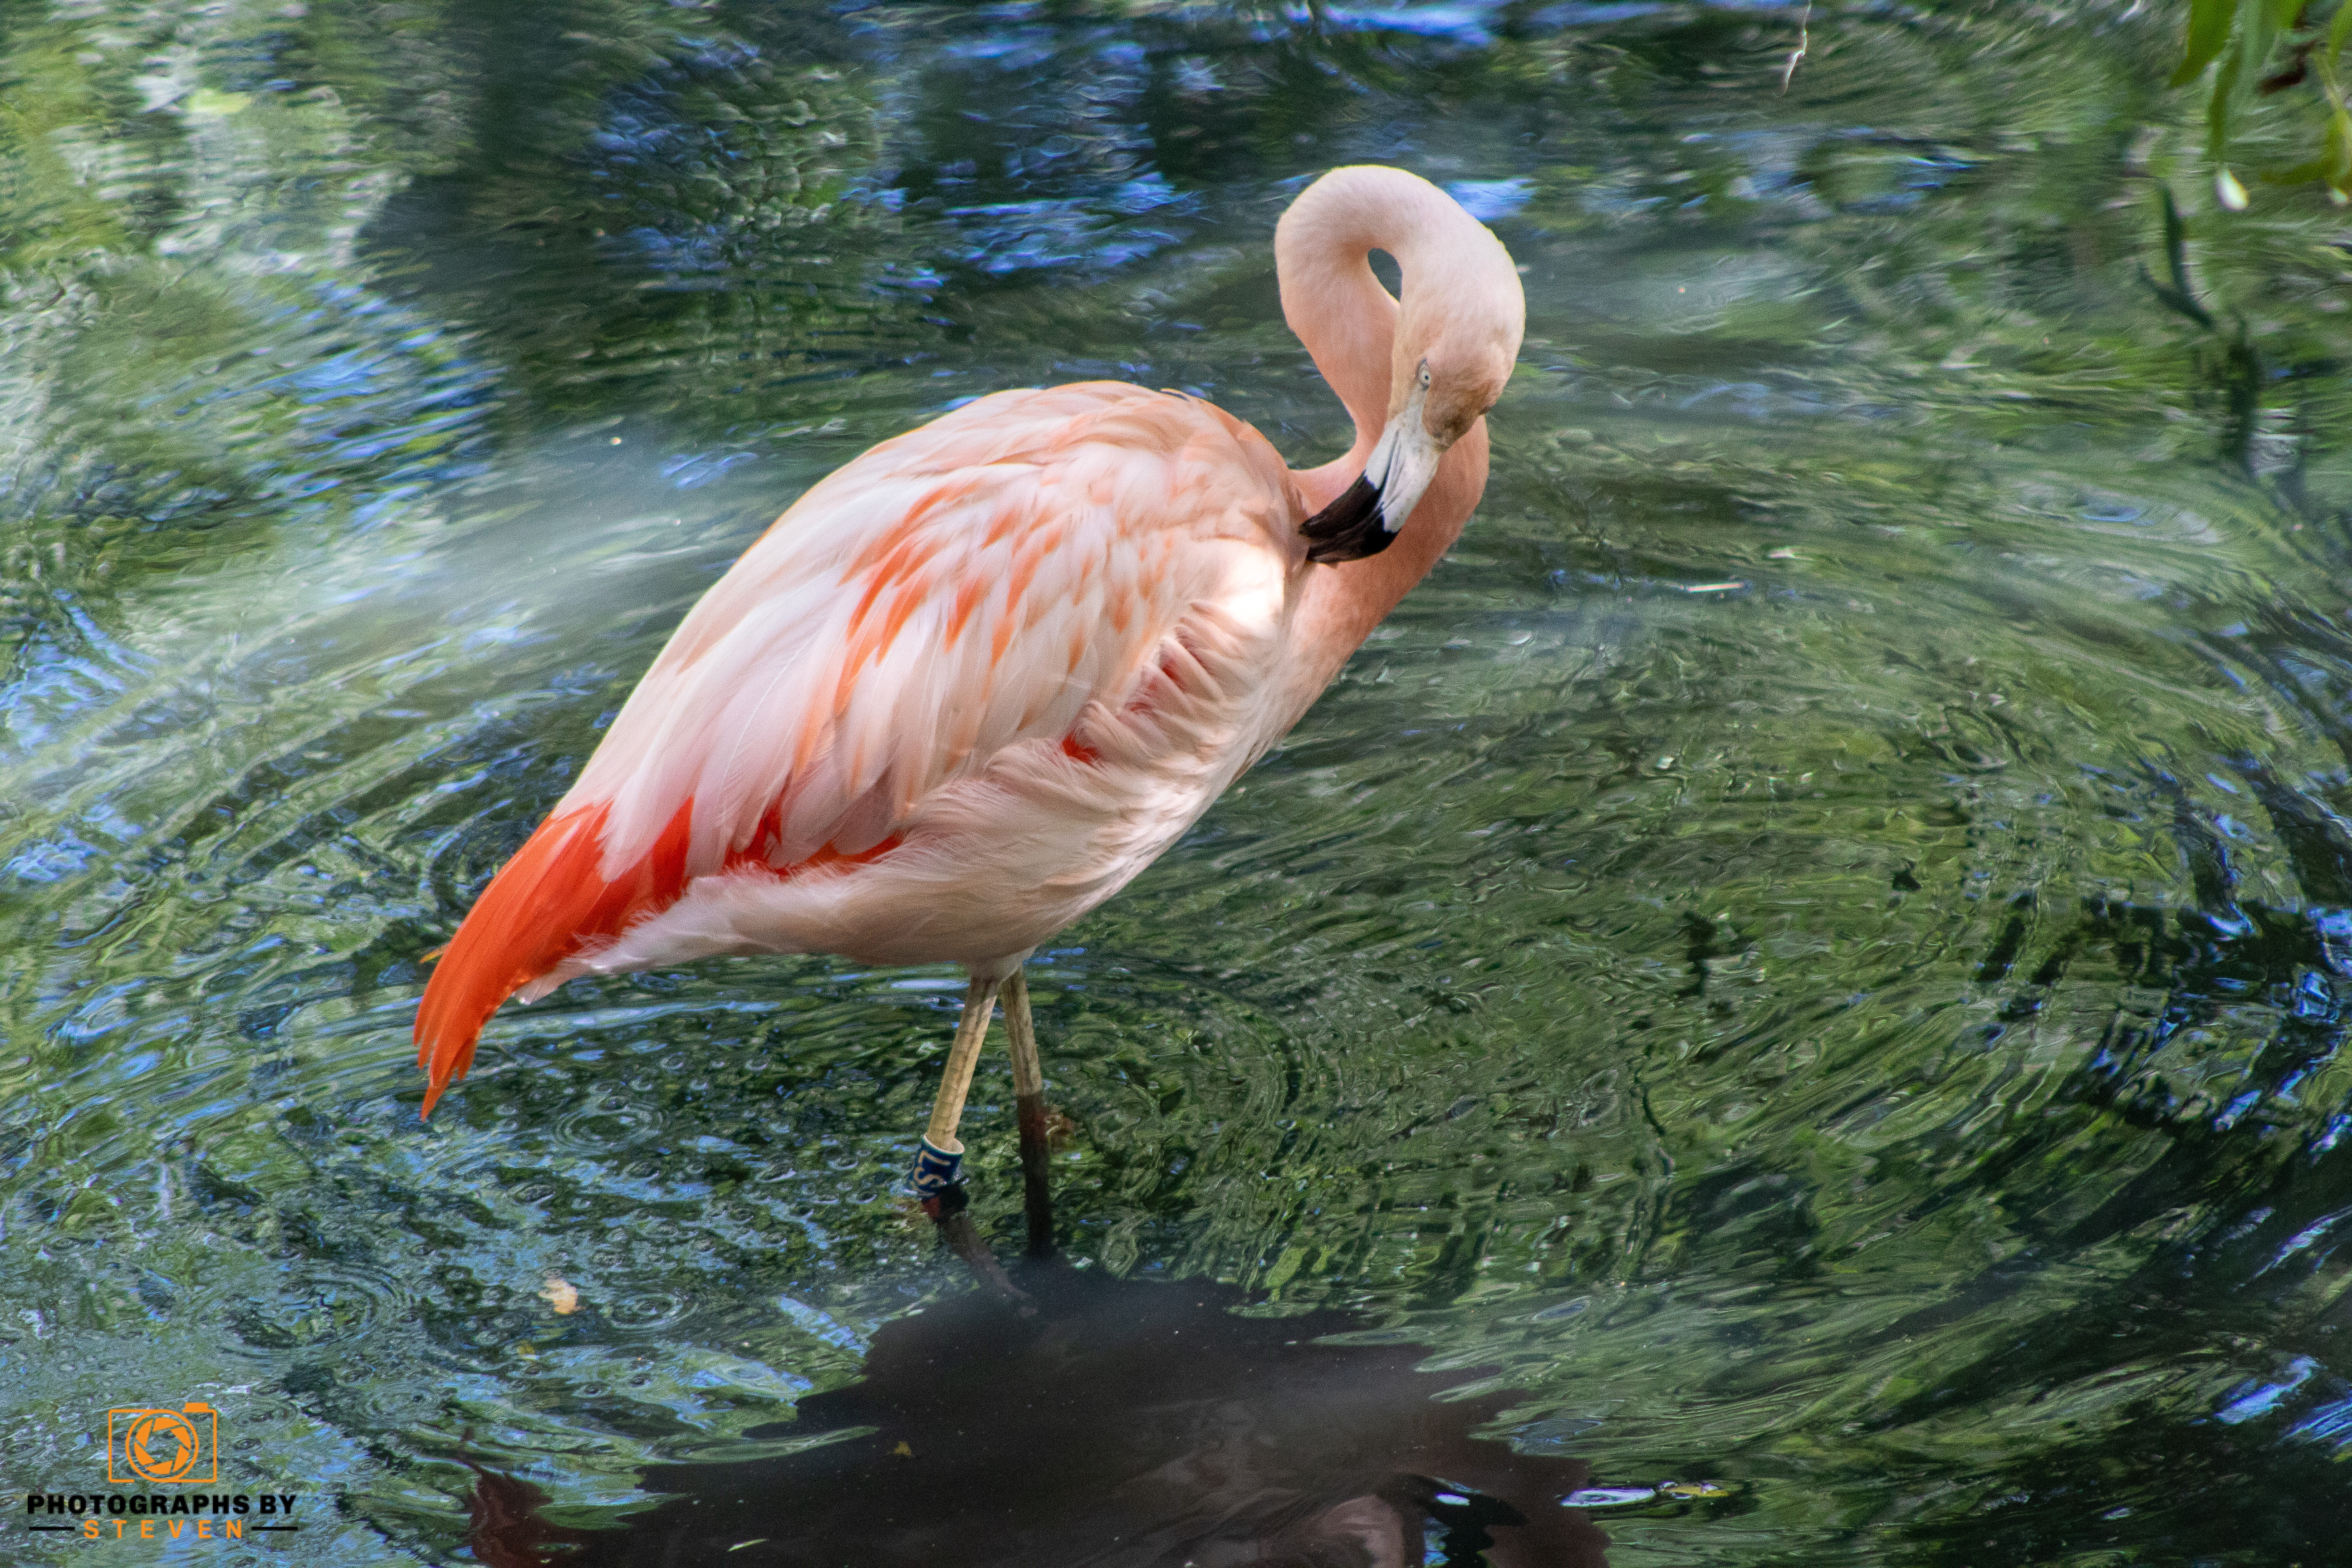 Why are flamingos pink?